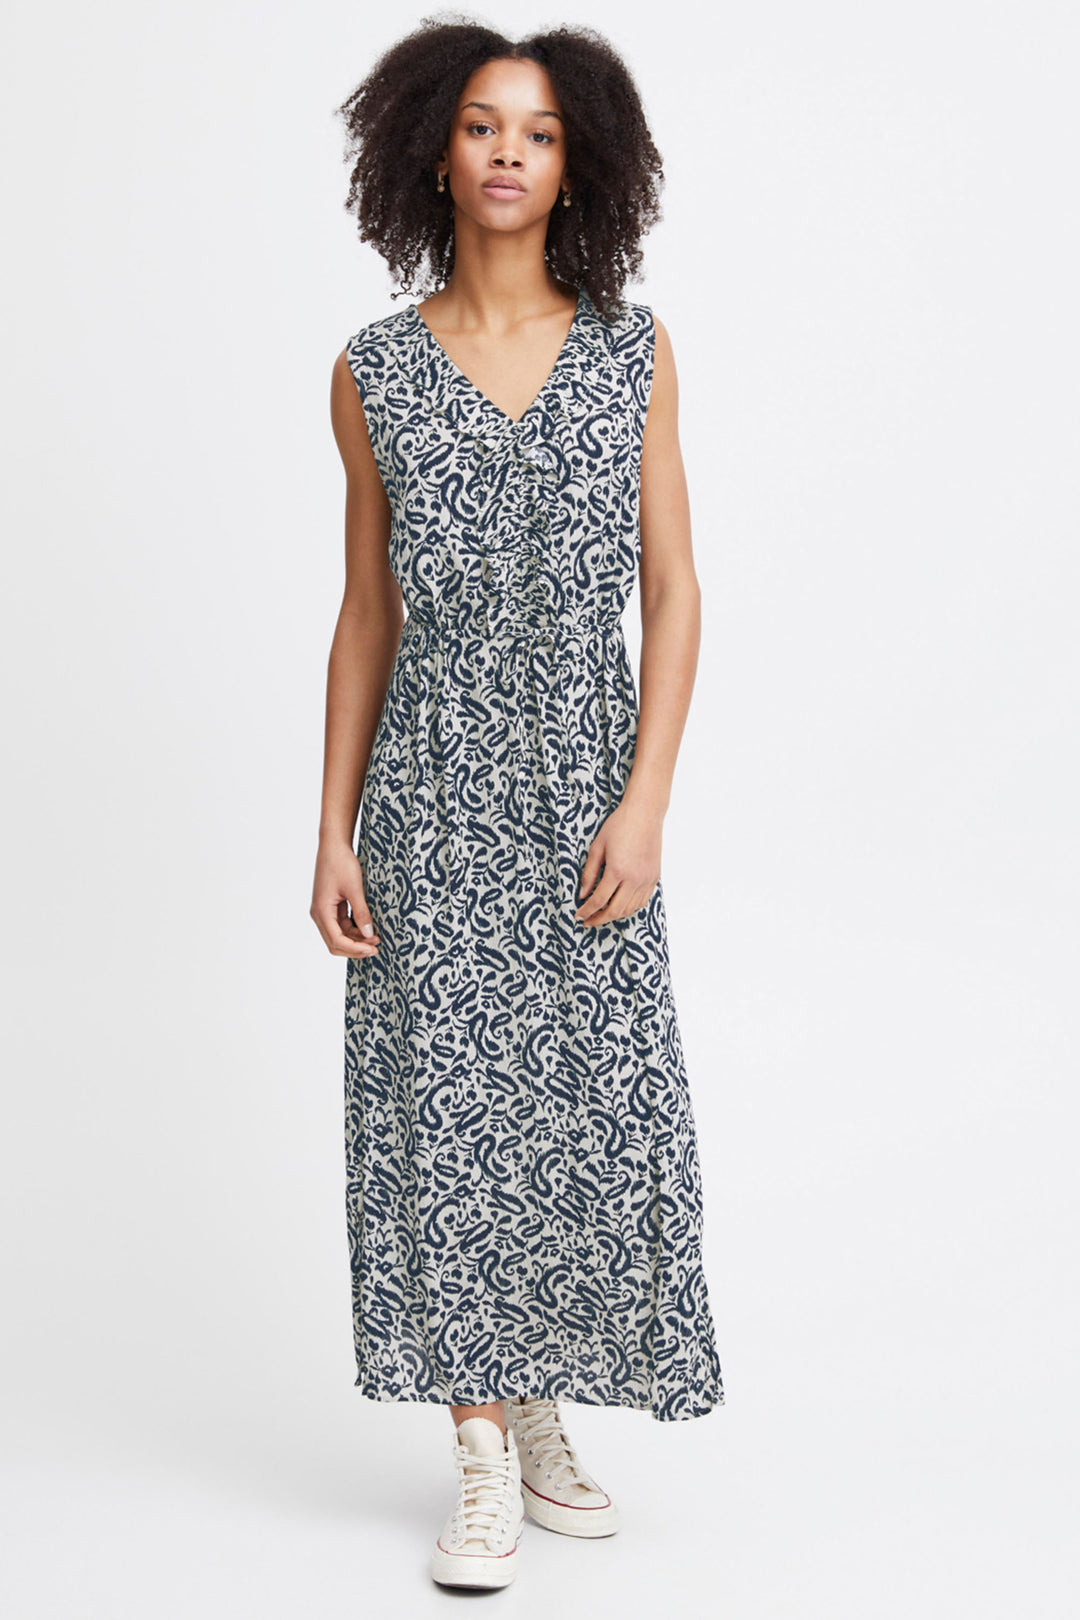 Ichi Summer 2024  The bold paisley print, v-neck and elastic waist for ultimate comfort and style. With a collar frill detail and made of soft and flowy viscose, it's perfect for day or night. 